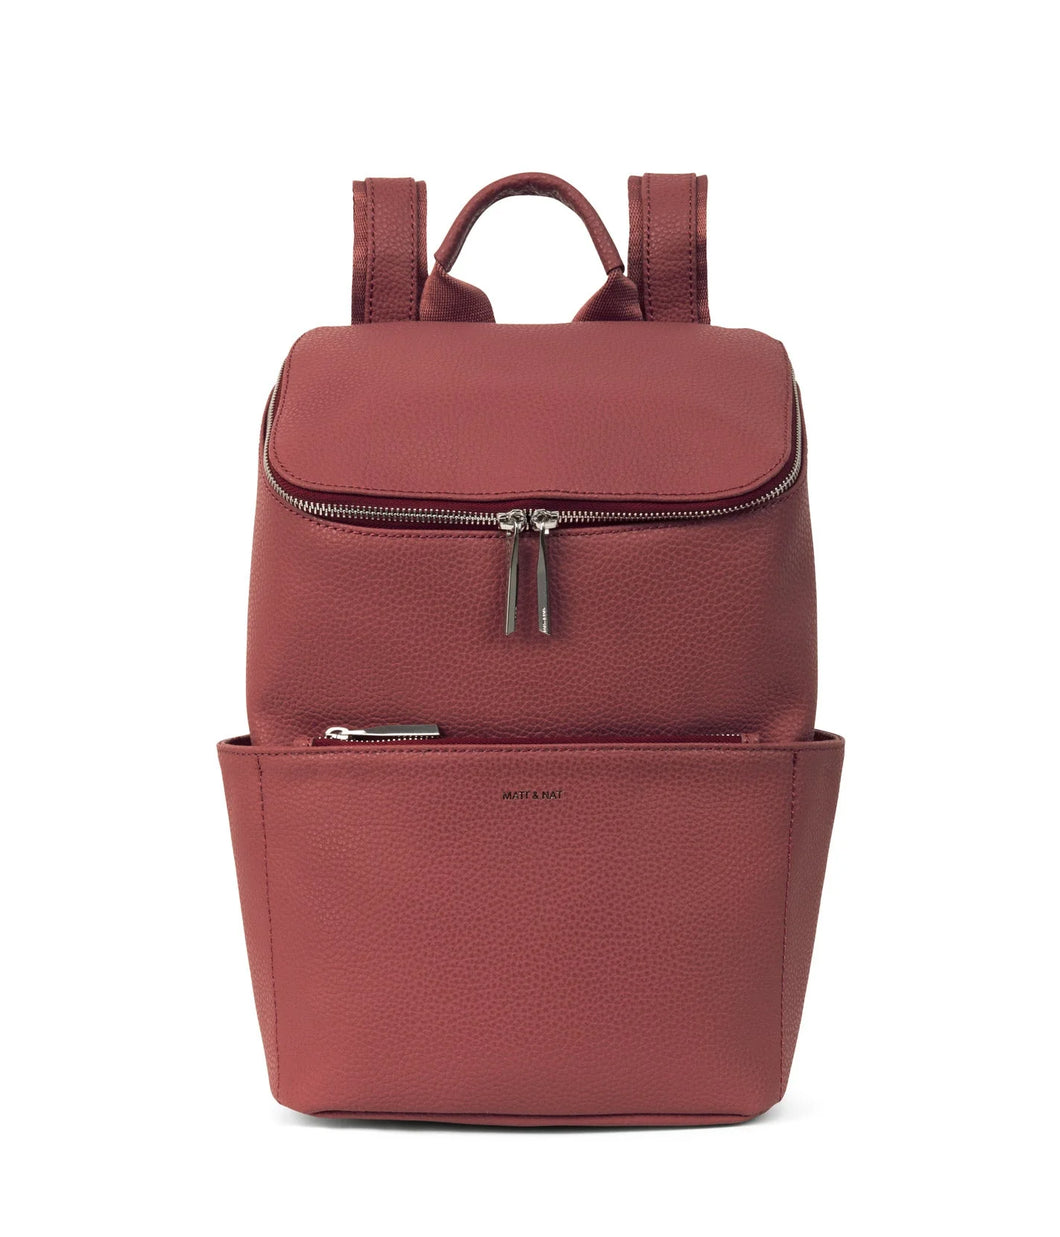 BRAVE PURITY BACKPACK IN LYCHEE